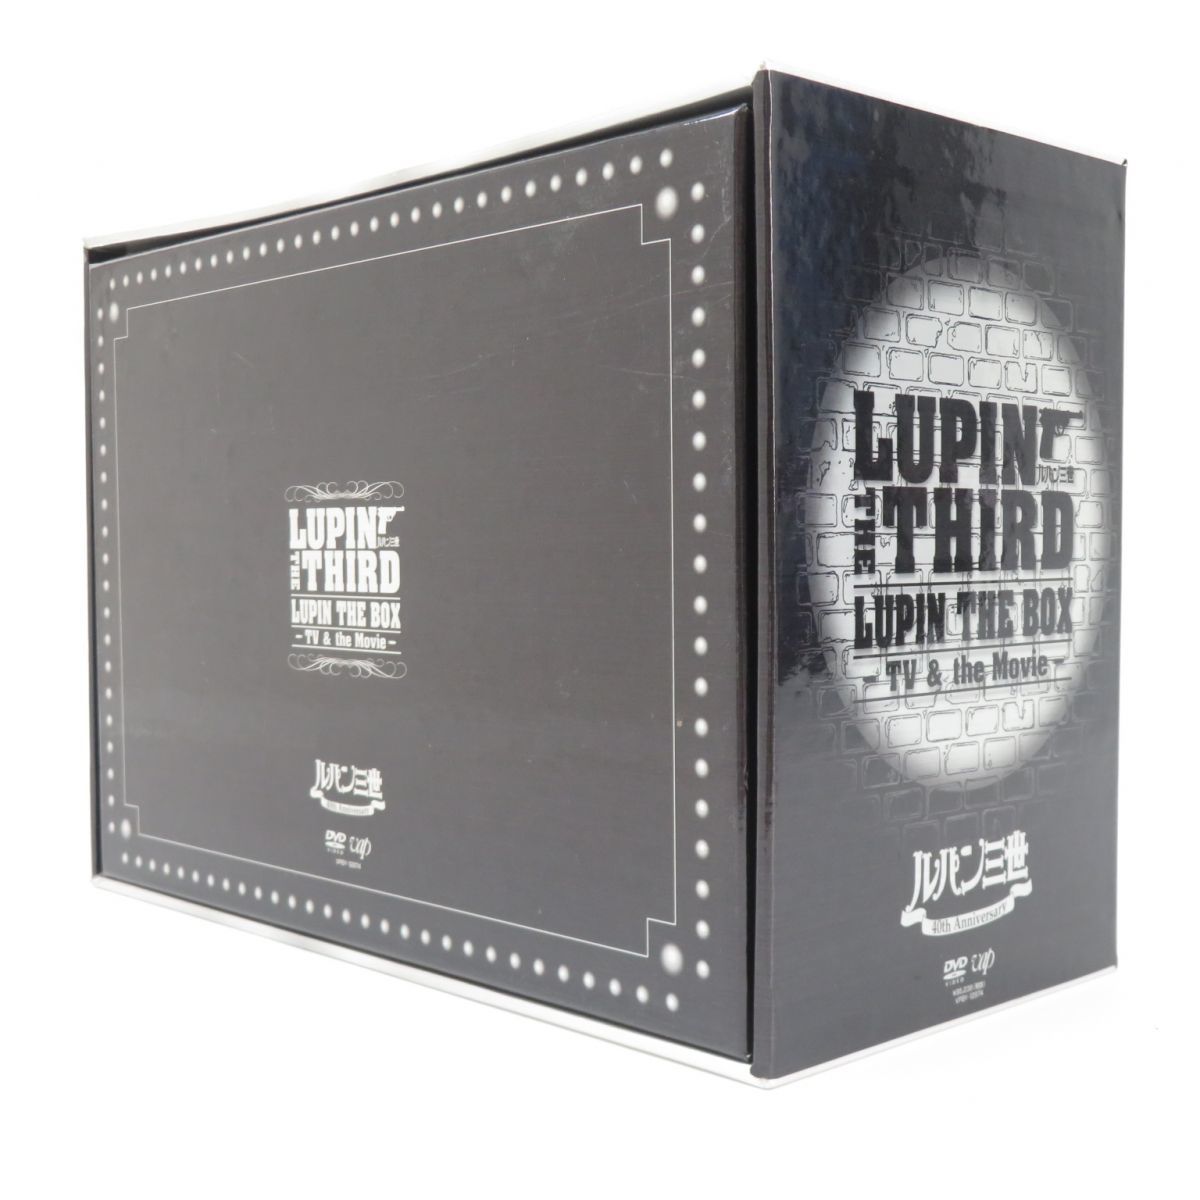 LUPIN THE BOX-TV&the Movie-〈初回生産限定・42枚組〉-